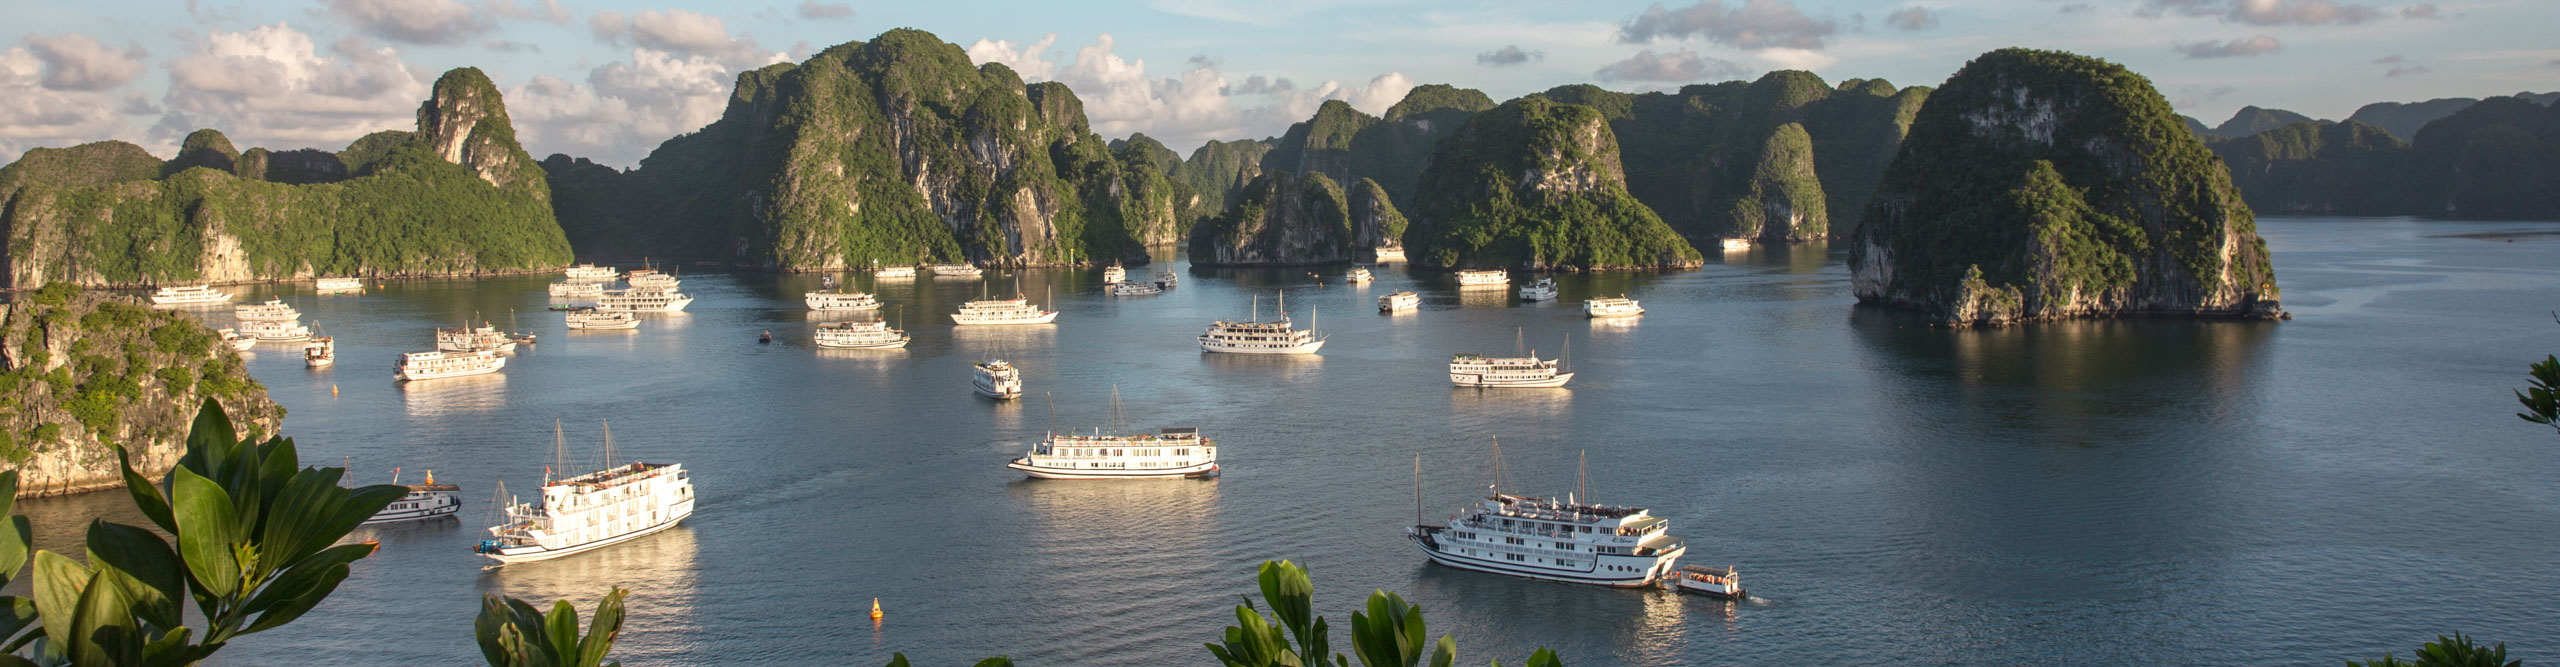 Sunset view of the cruise boats and island of Halong Bay, Vietnam